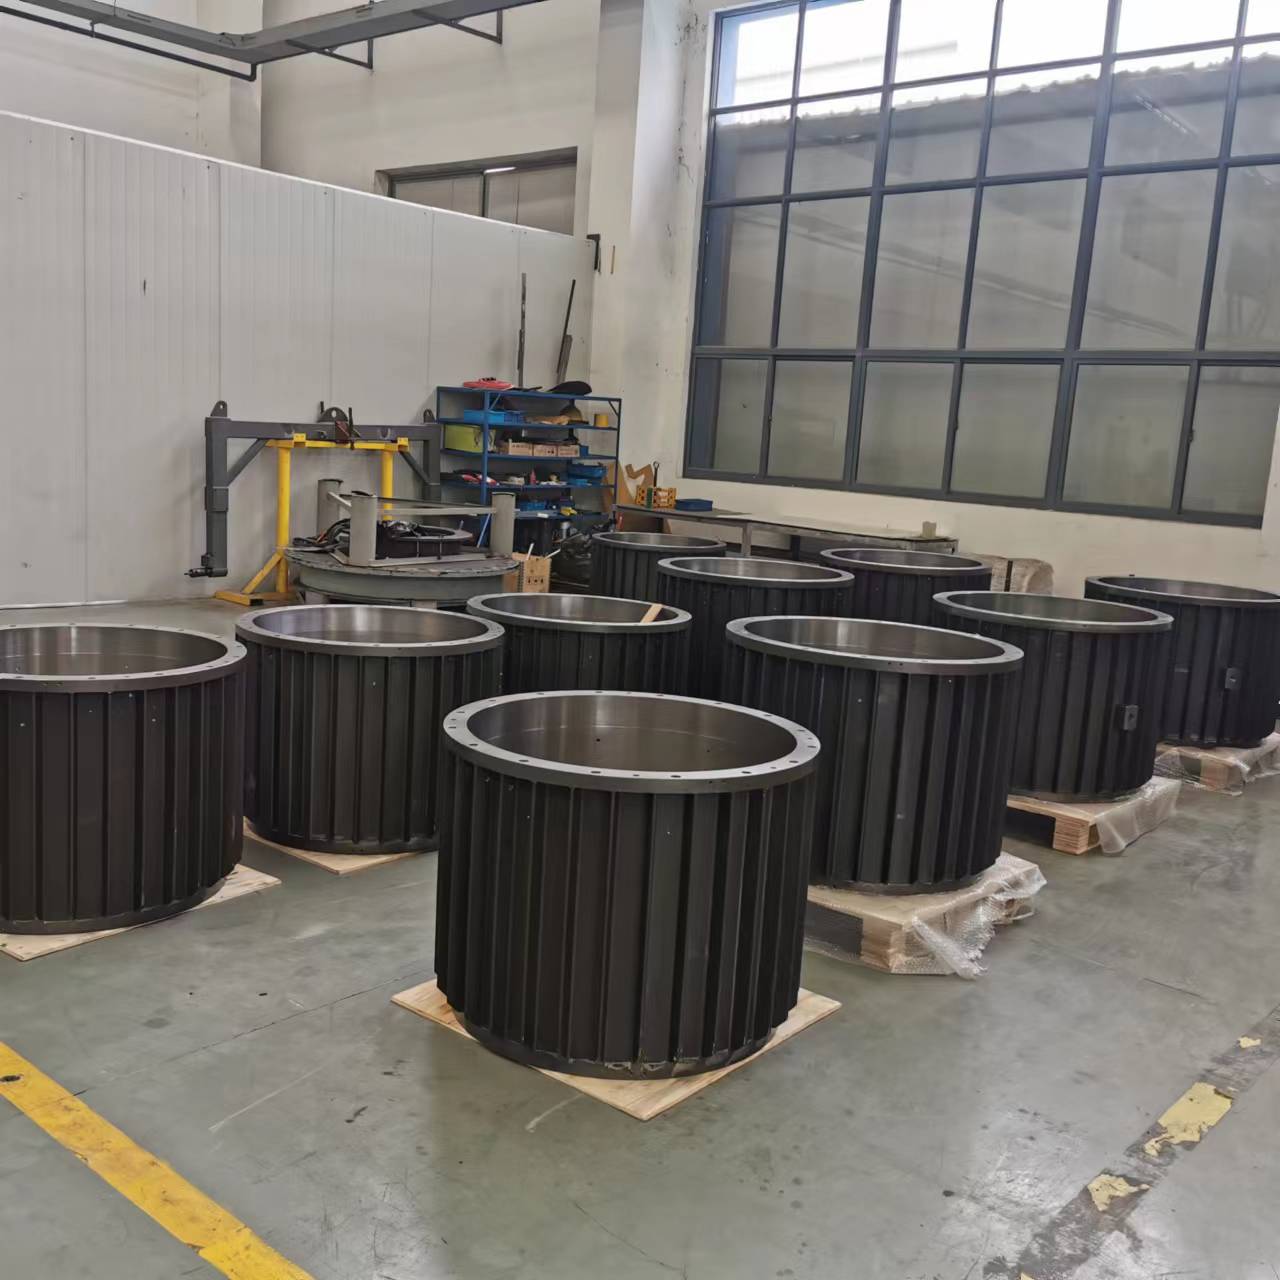 1 MW, 1000kw, customizable three-phase AC synchronous direct drive liquid cooled hydraulic wind turbine permanent magnet generator